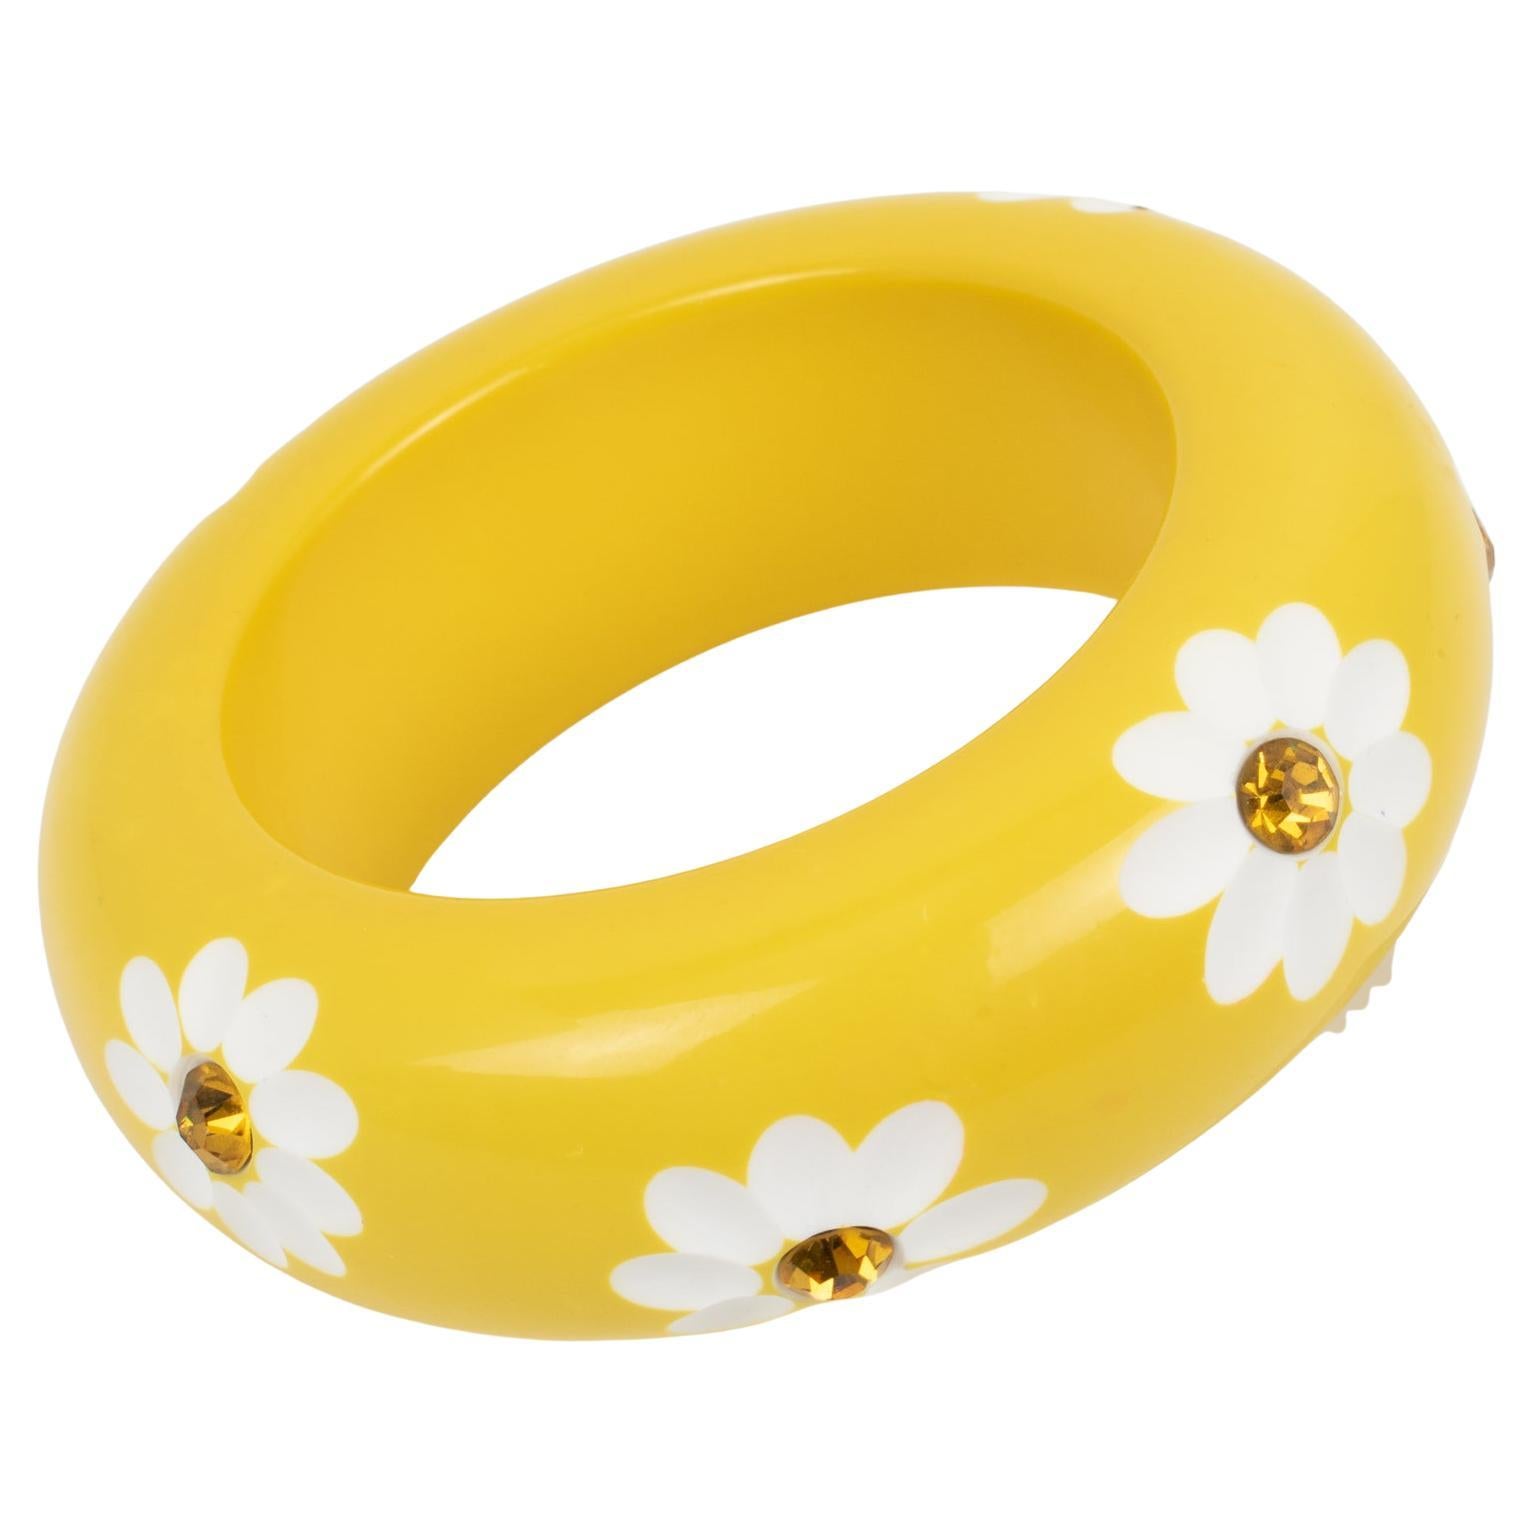 Massive Yellow Lucite Bracelet Bangle with Carved Daisy Flowers For Sale